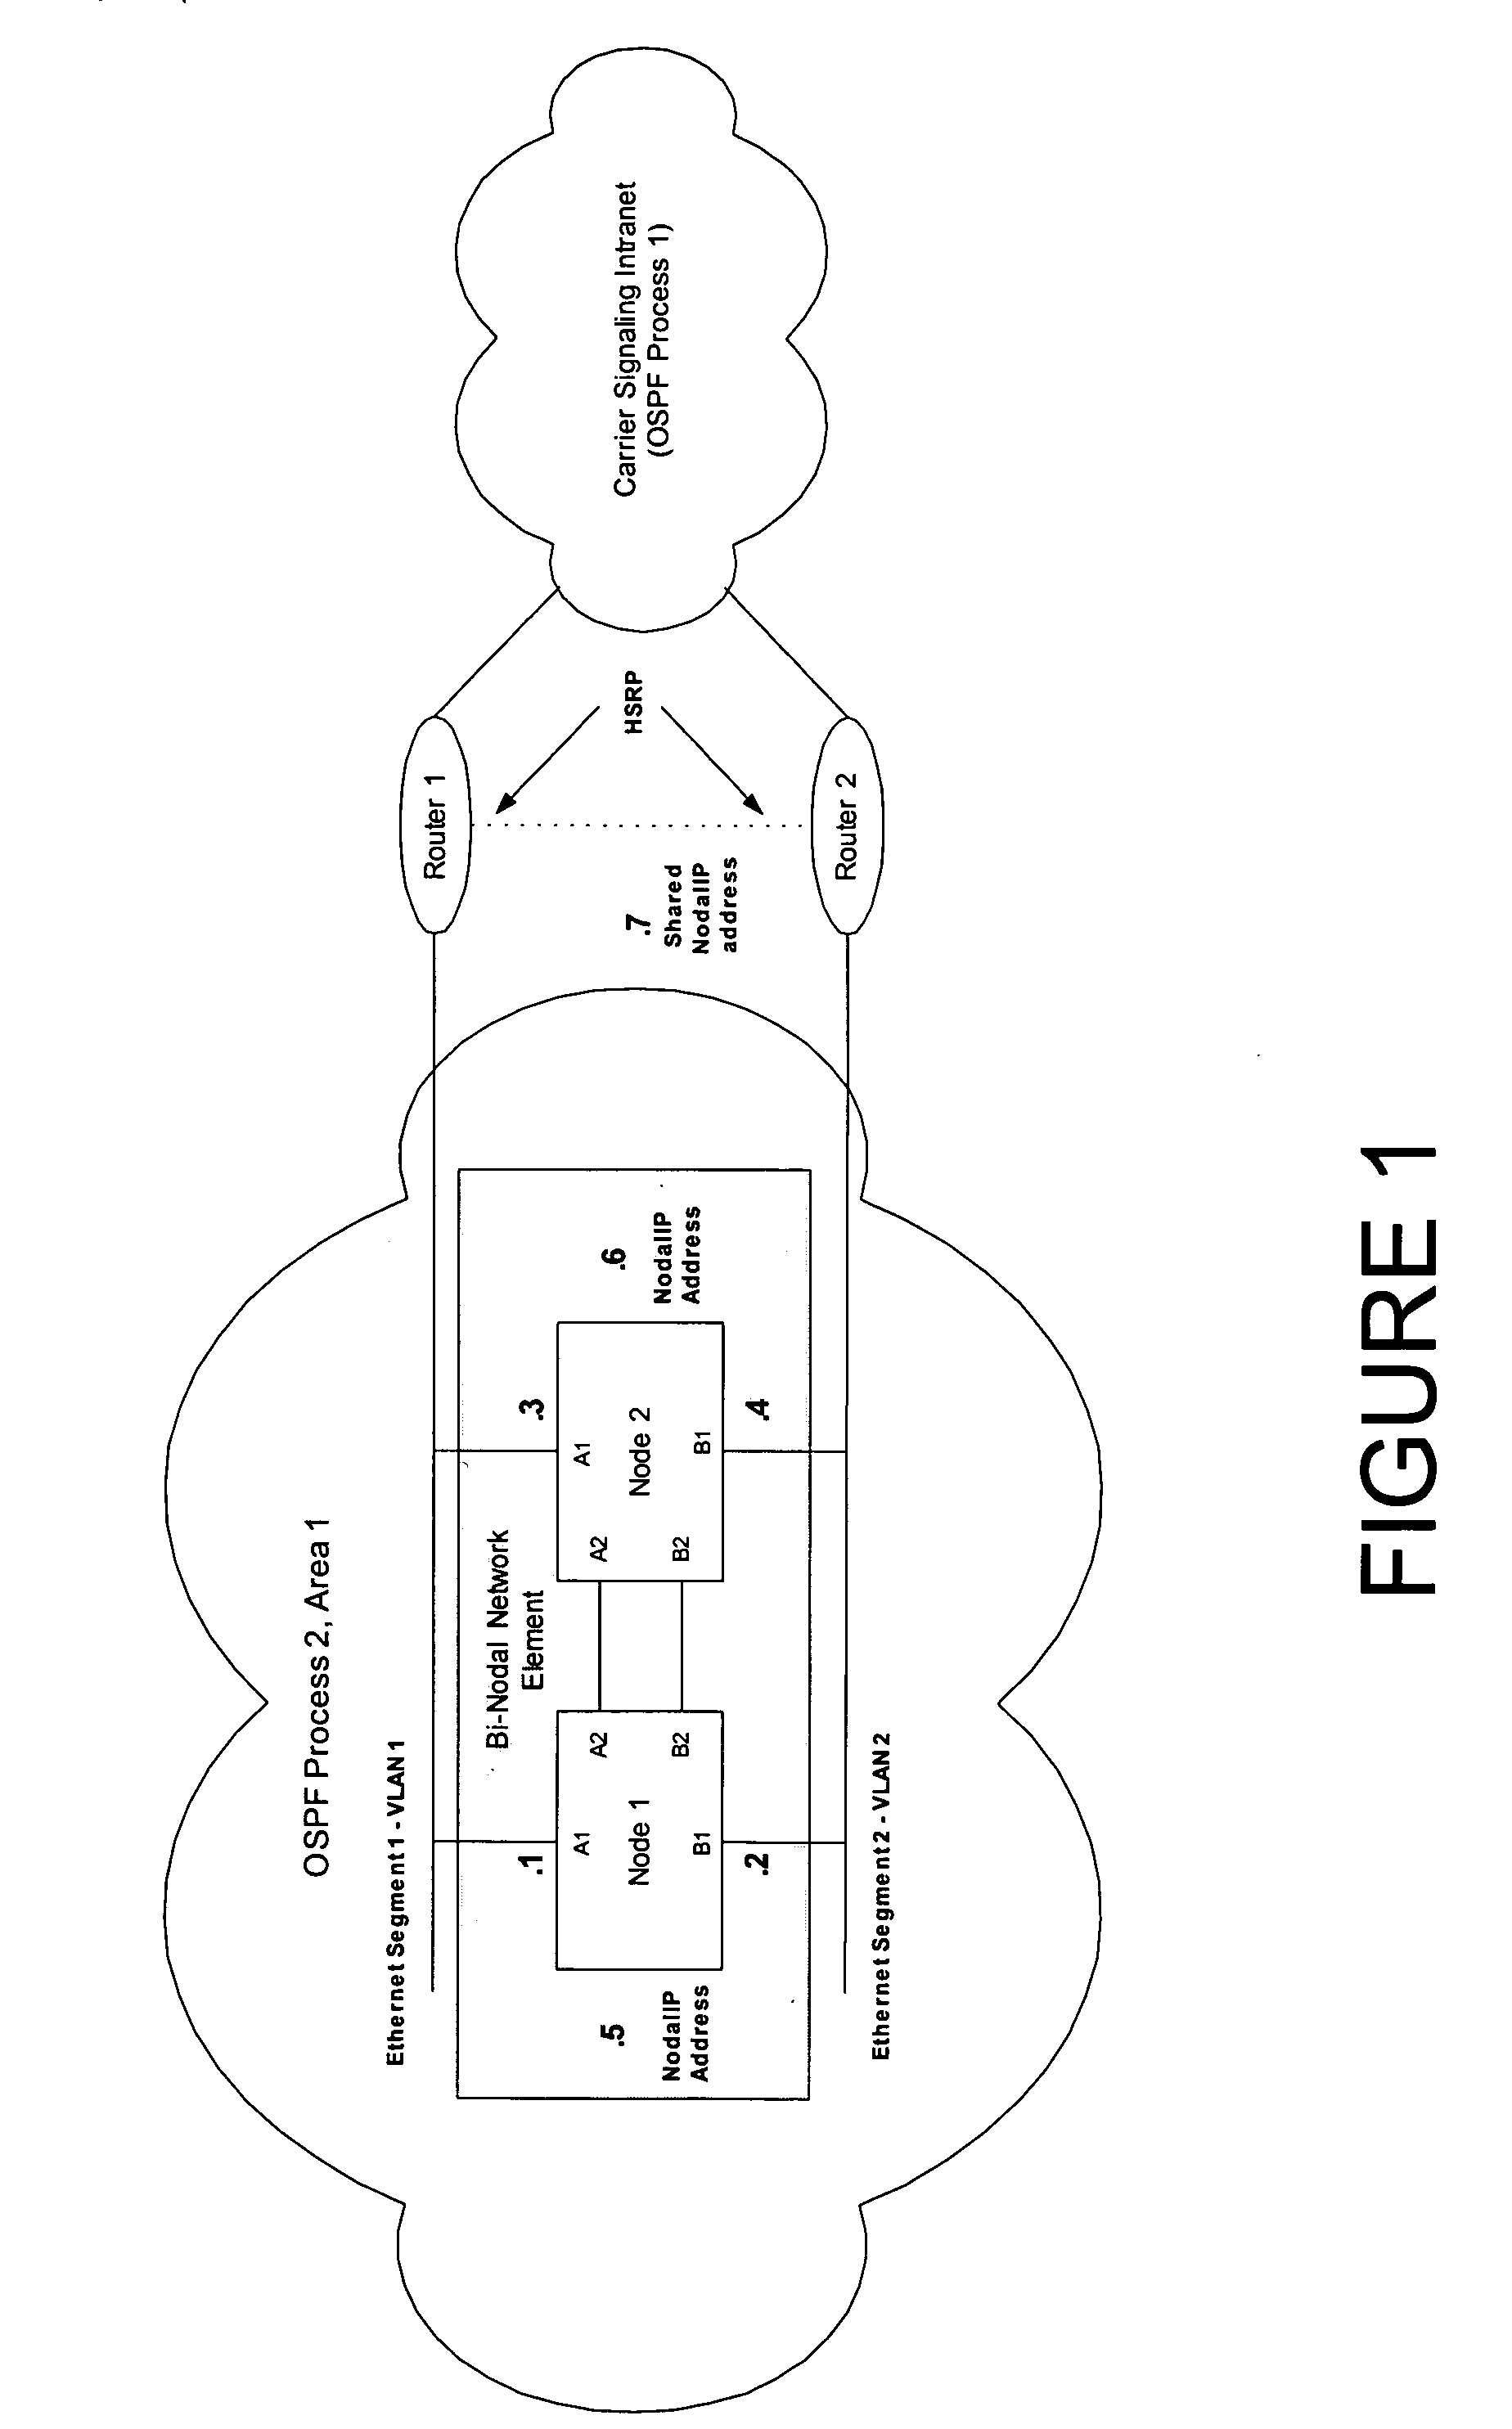 Systems and methods for communicating with bi-nodal network elements